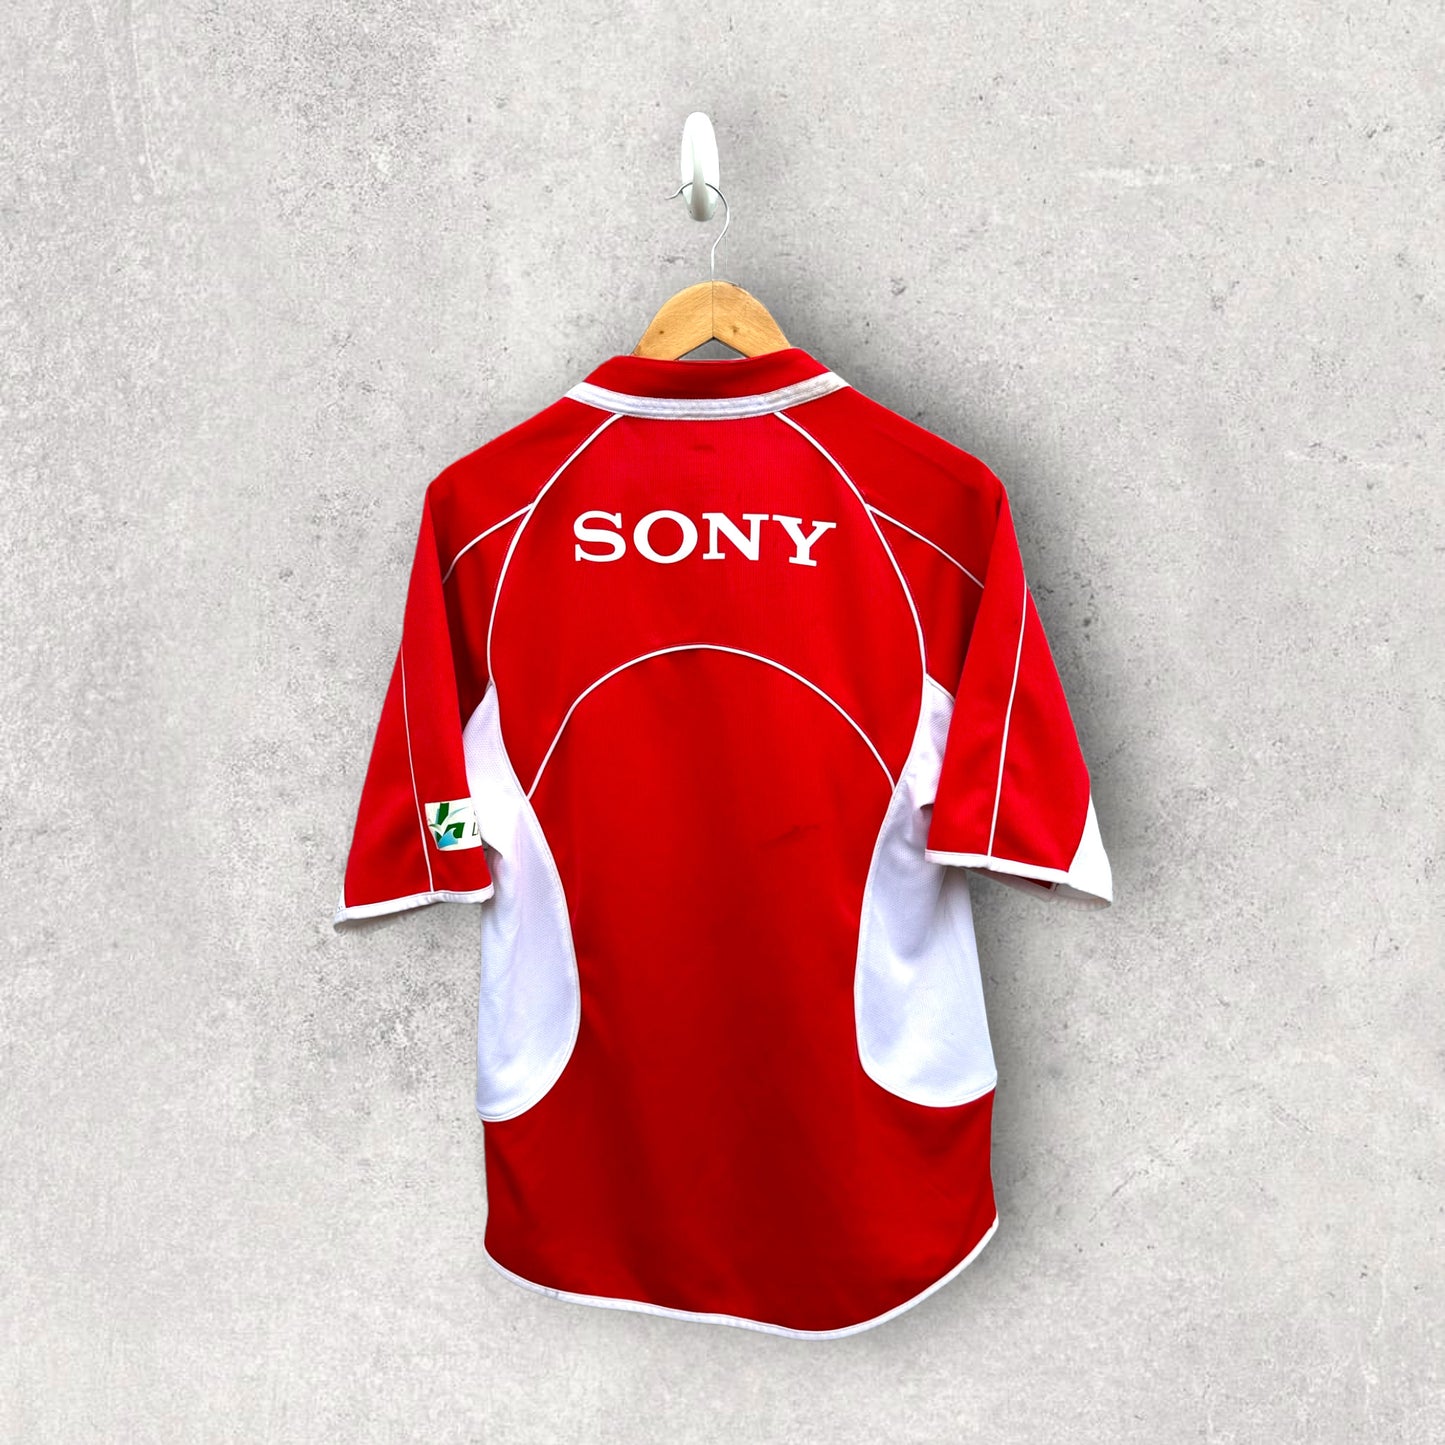 US DAX RUGBY UNION JERSEY